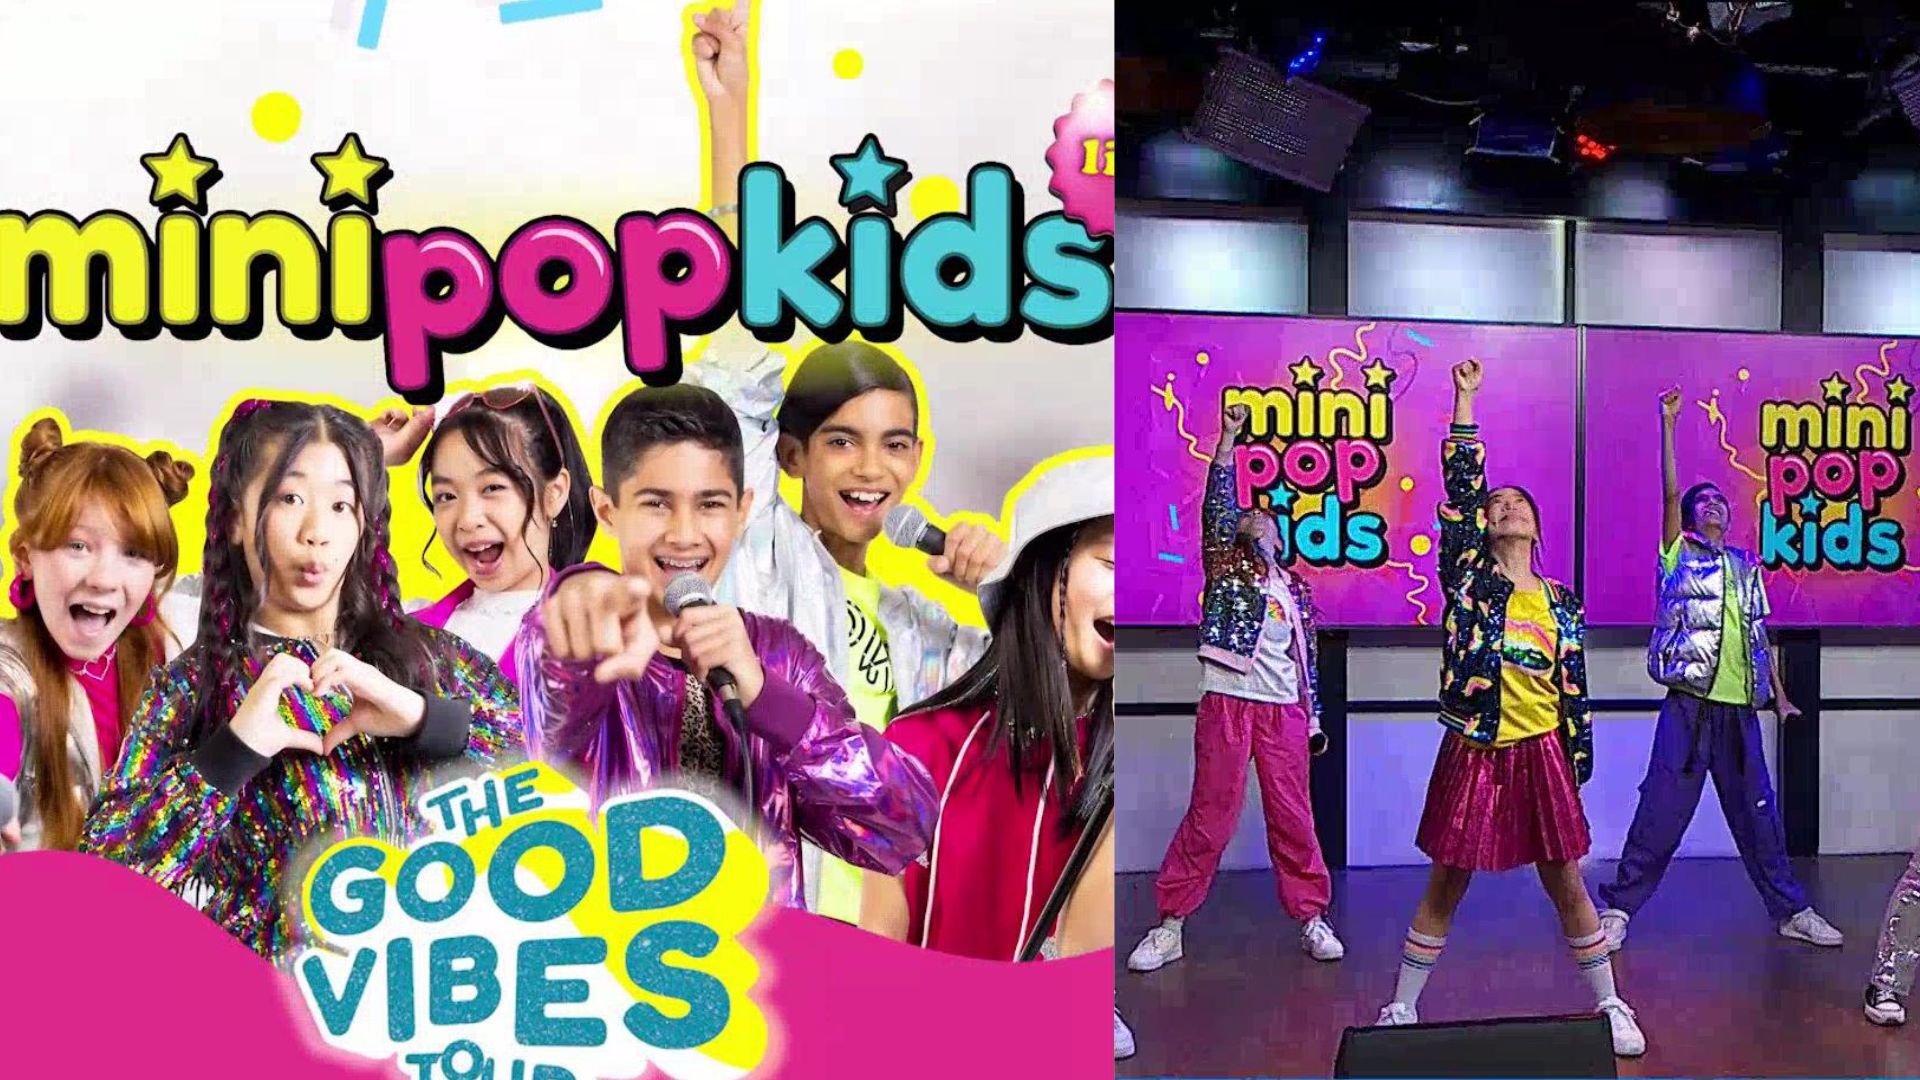 The Mini Pop Kids are LIVE in studio with an iconic performance